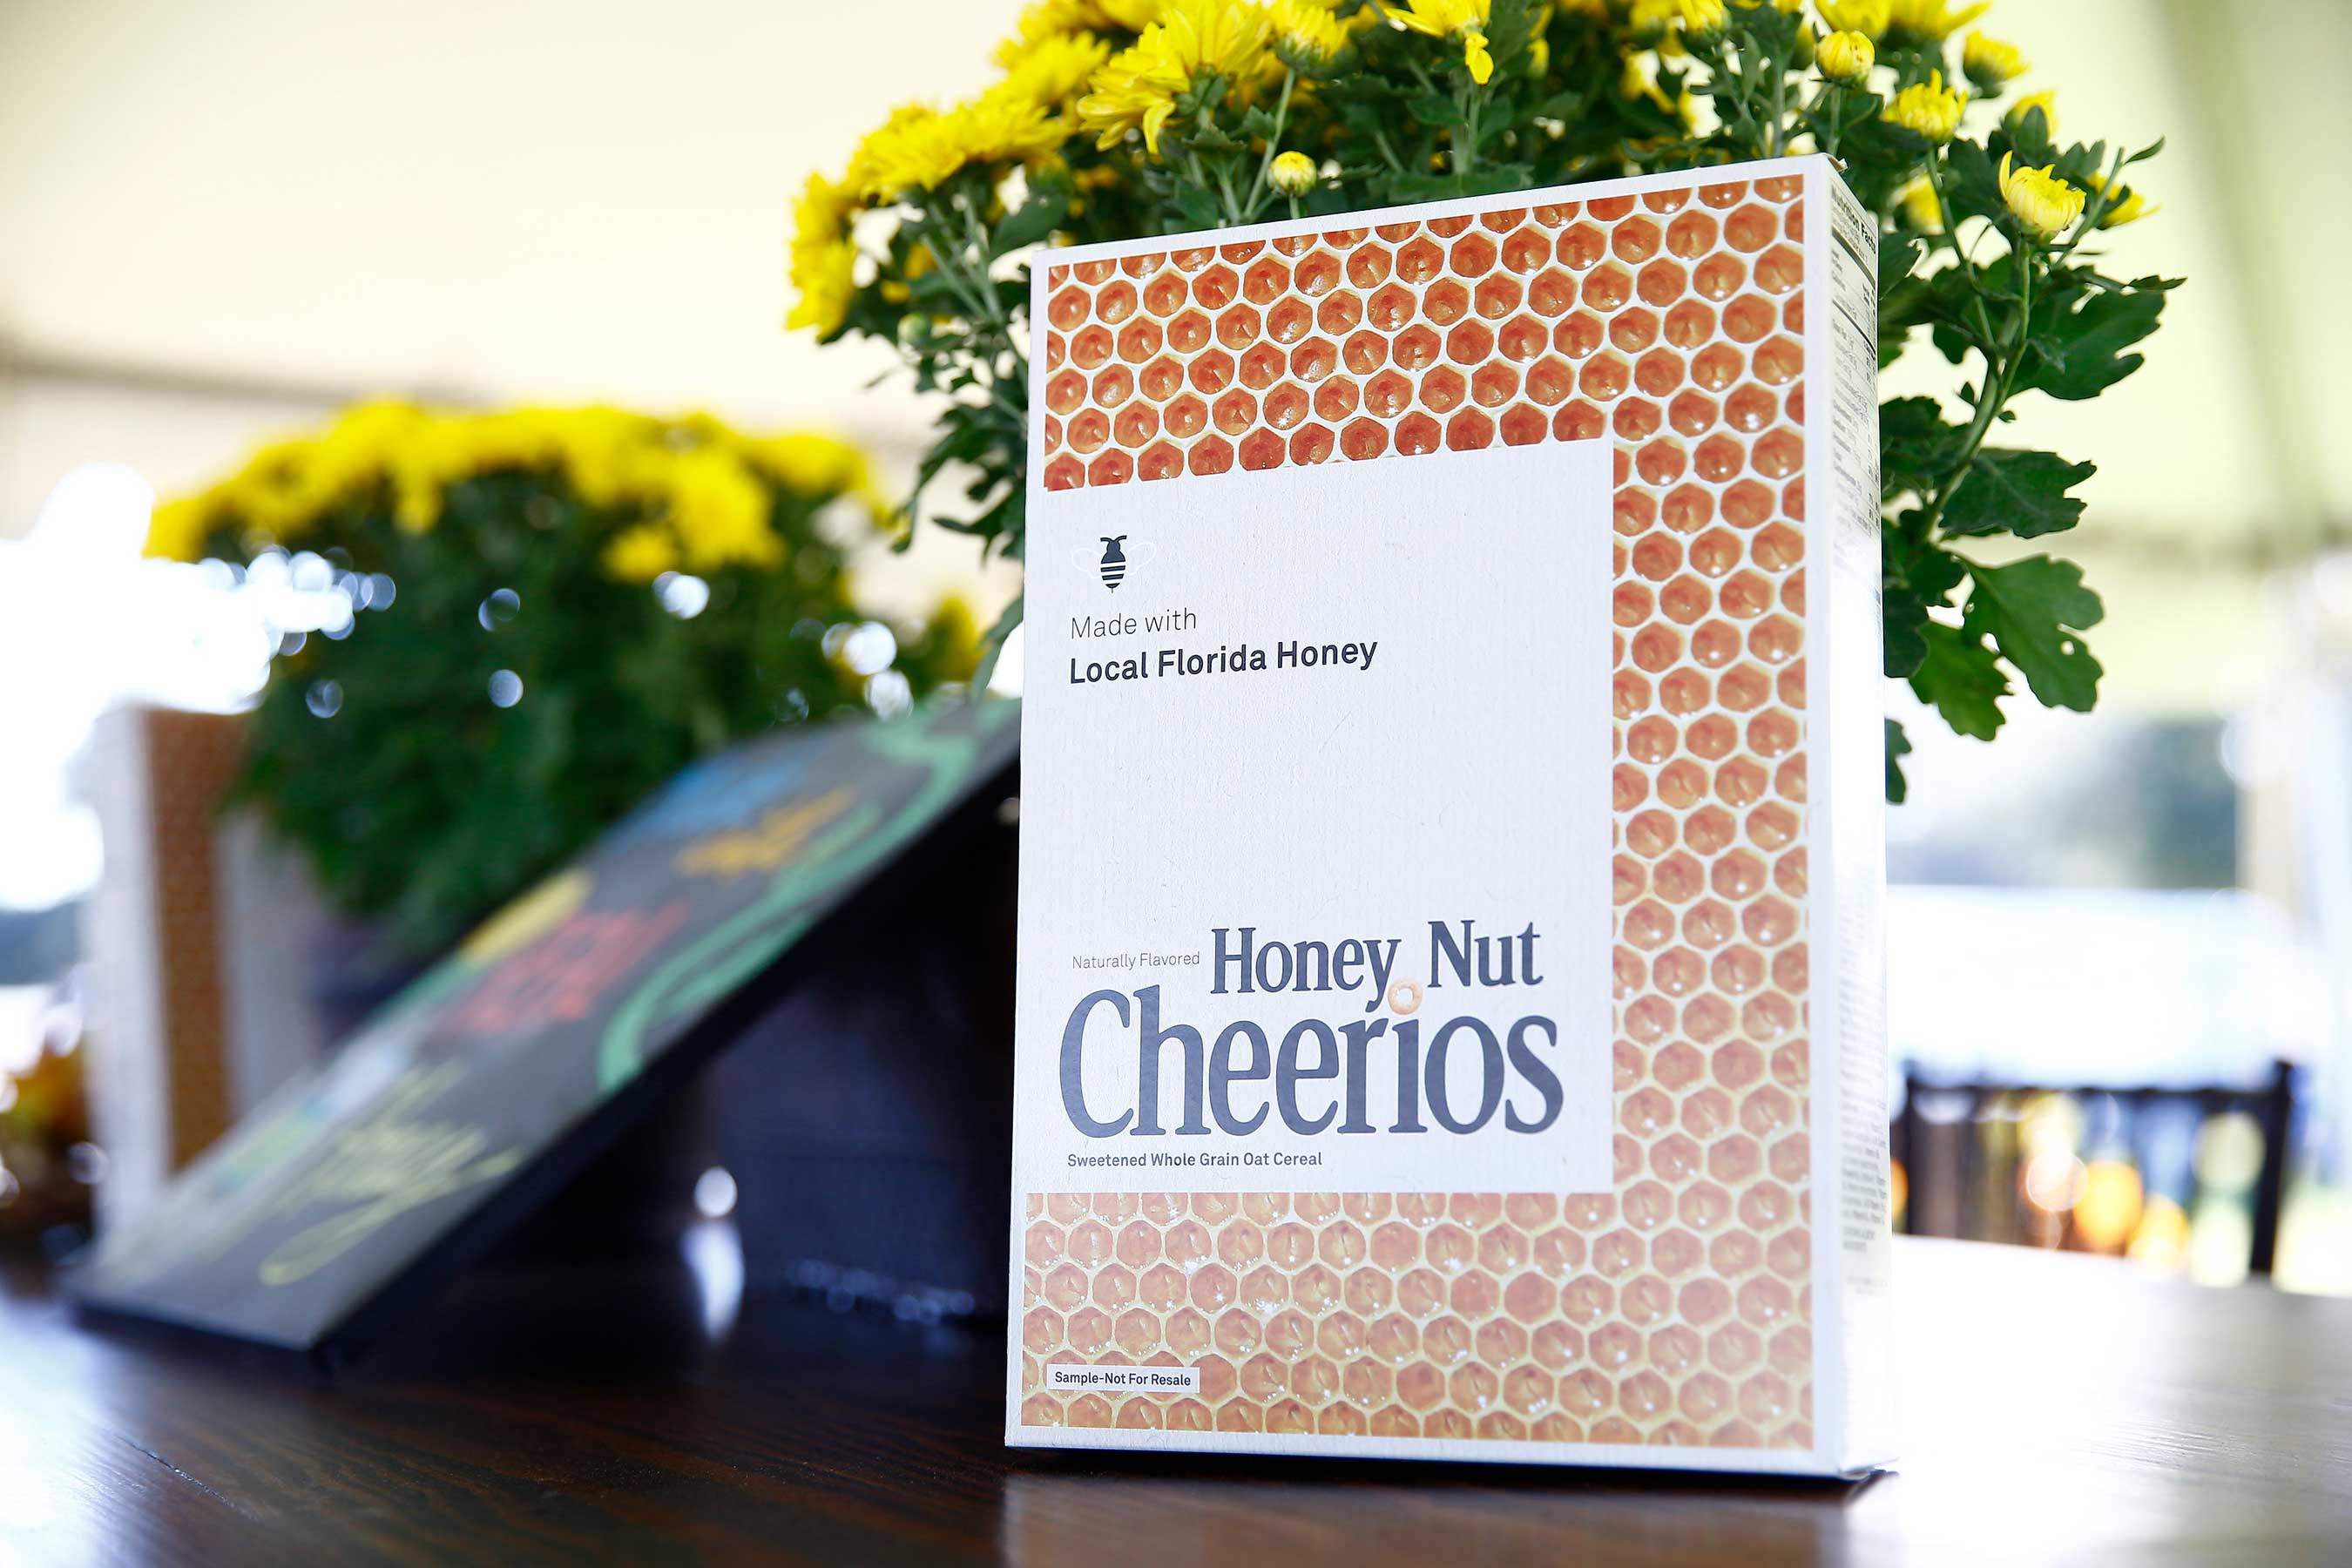 1 of only 40 limited edition boxes of Honey Nut Cheerios made from Bee Keeper Brent Dickson's real honey